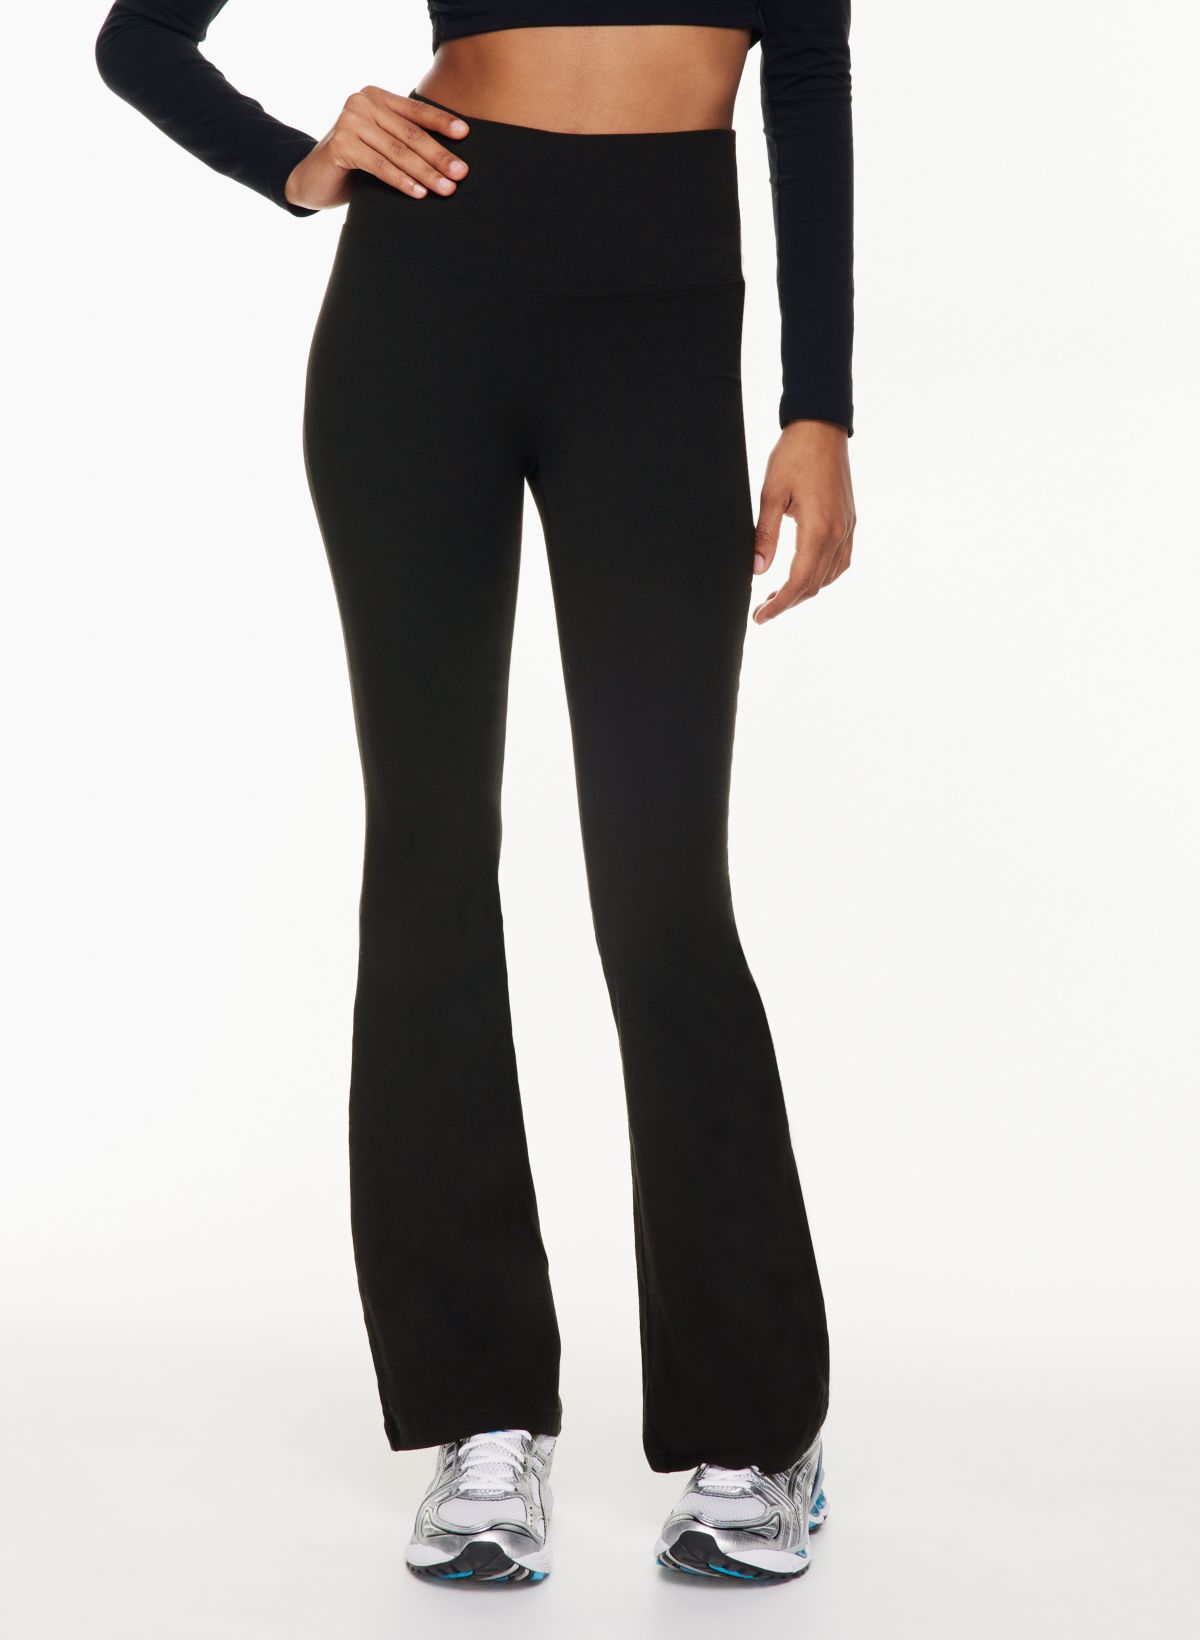 Stay comfortable and stylish with TnaCHILL Atmosphere Flare Hi-Rise Leggings